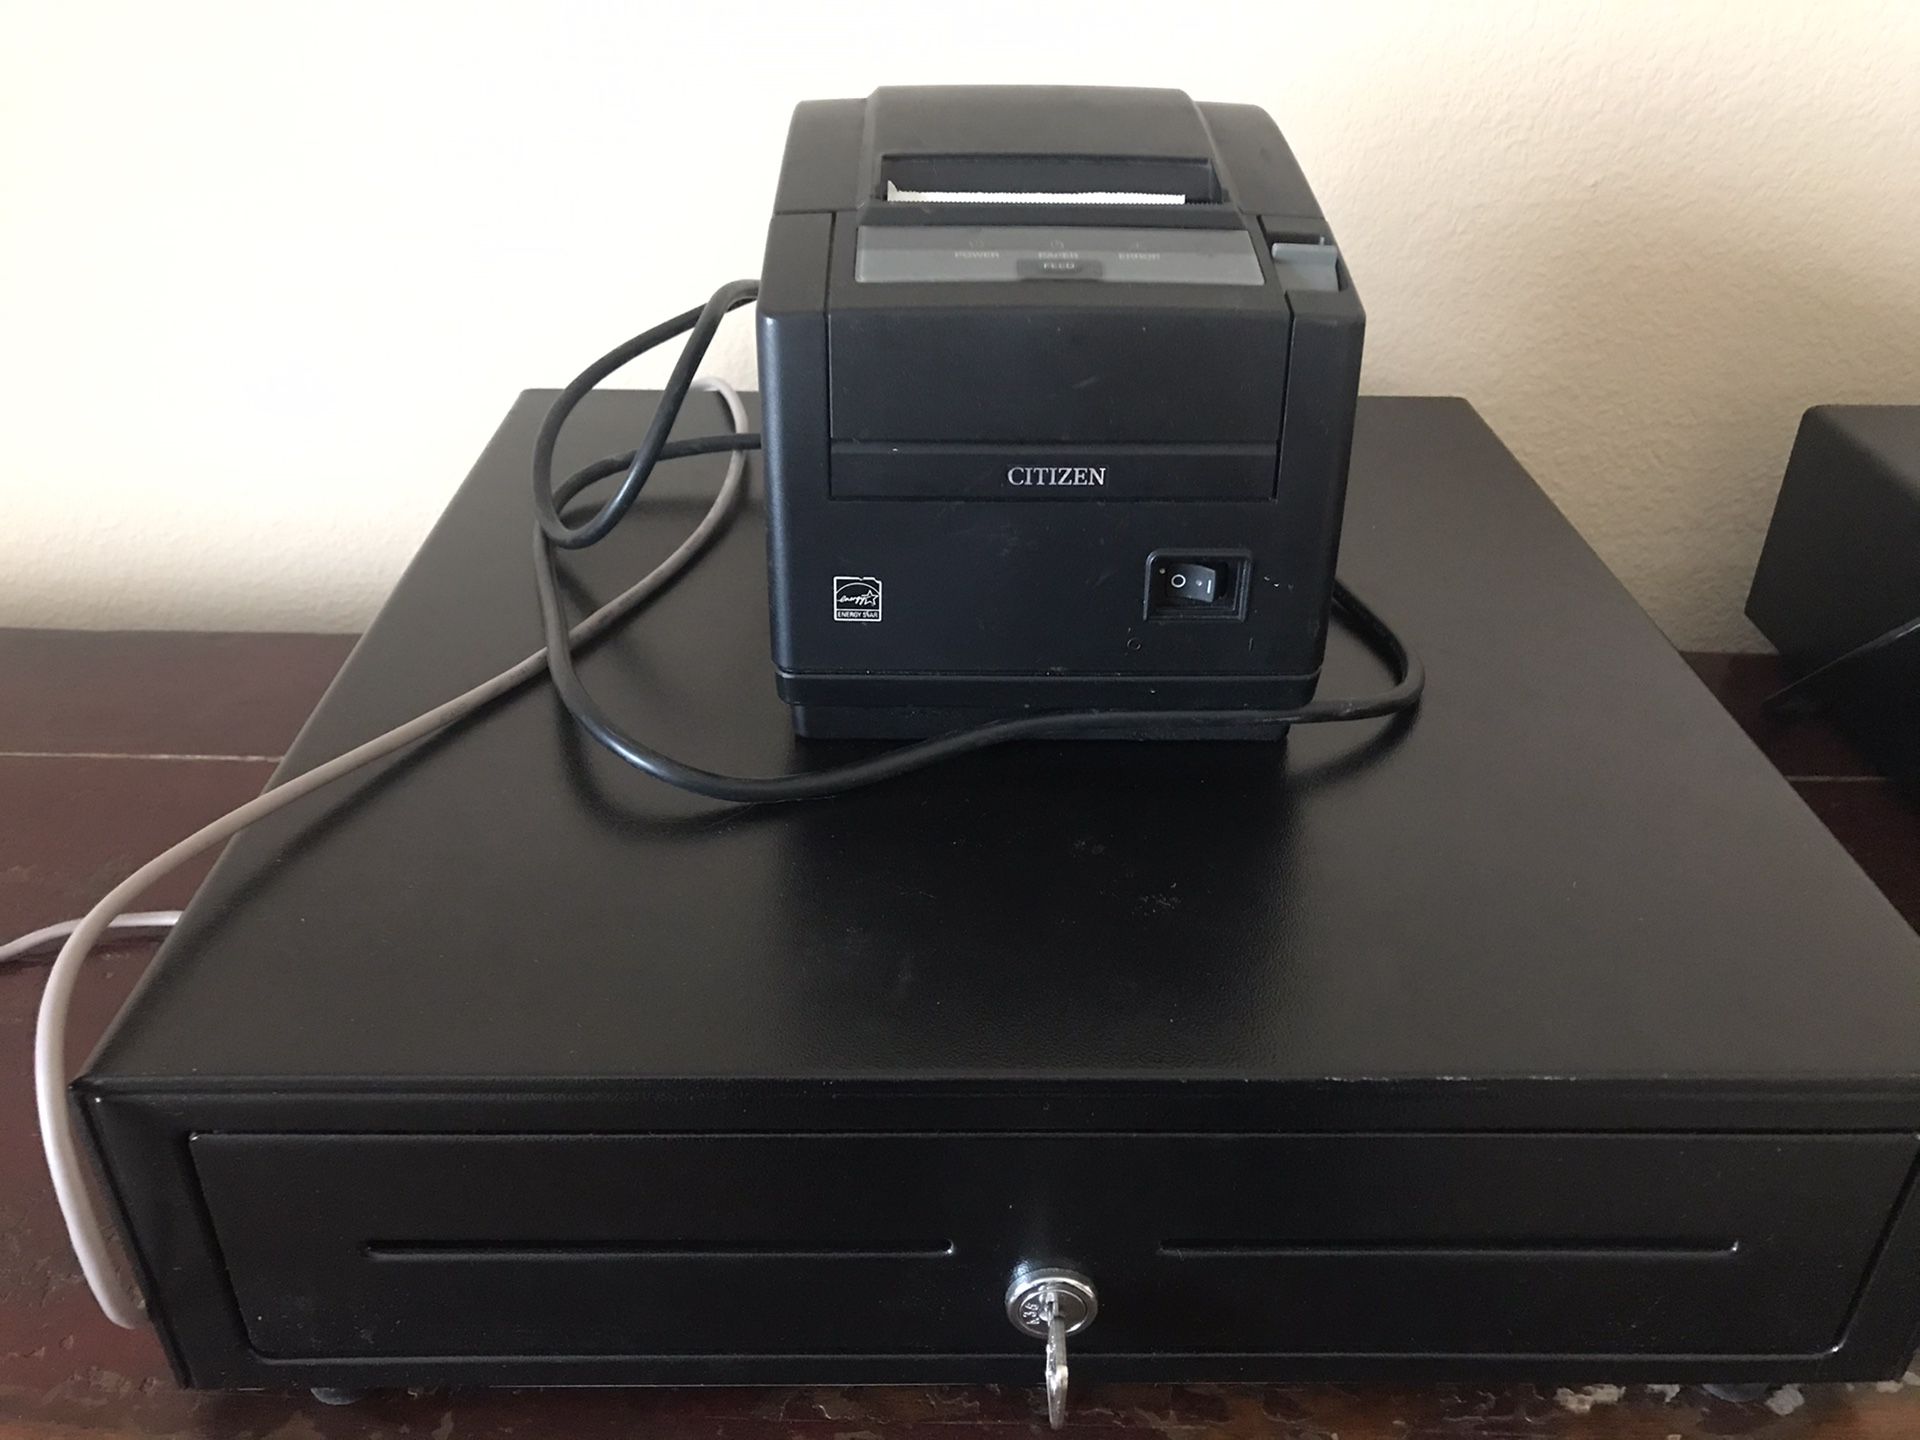 Citizen line thermal printer model CT-S601 with APG cash drawer